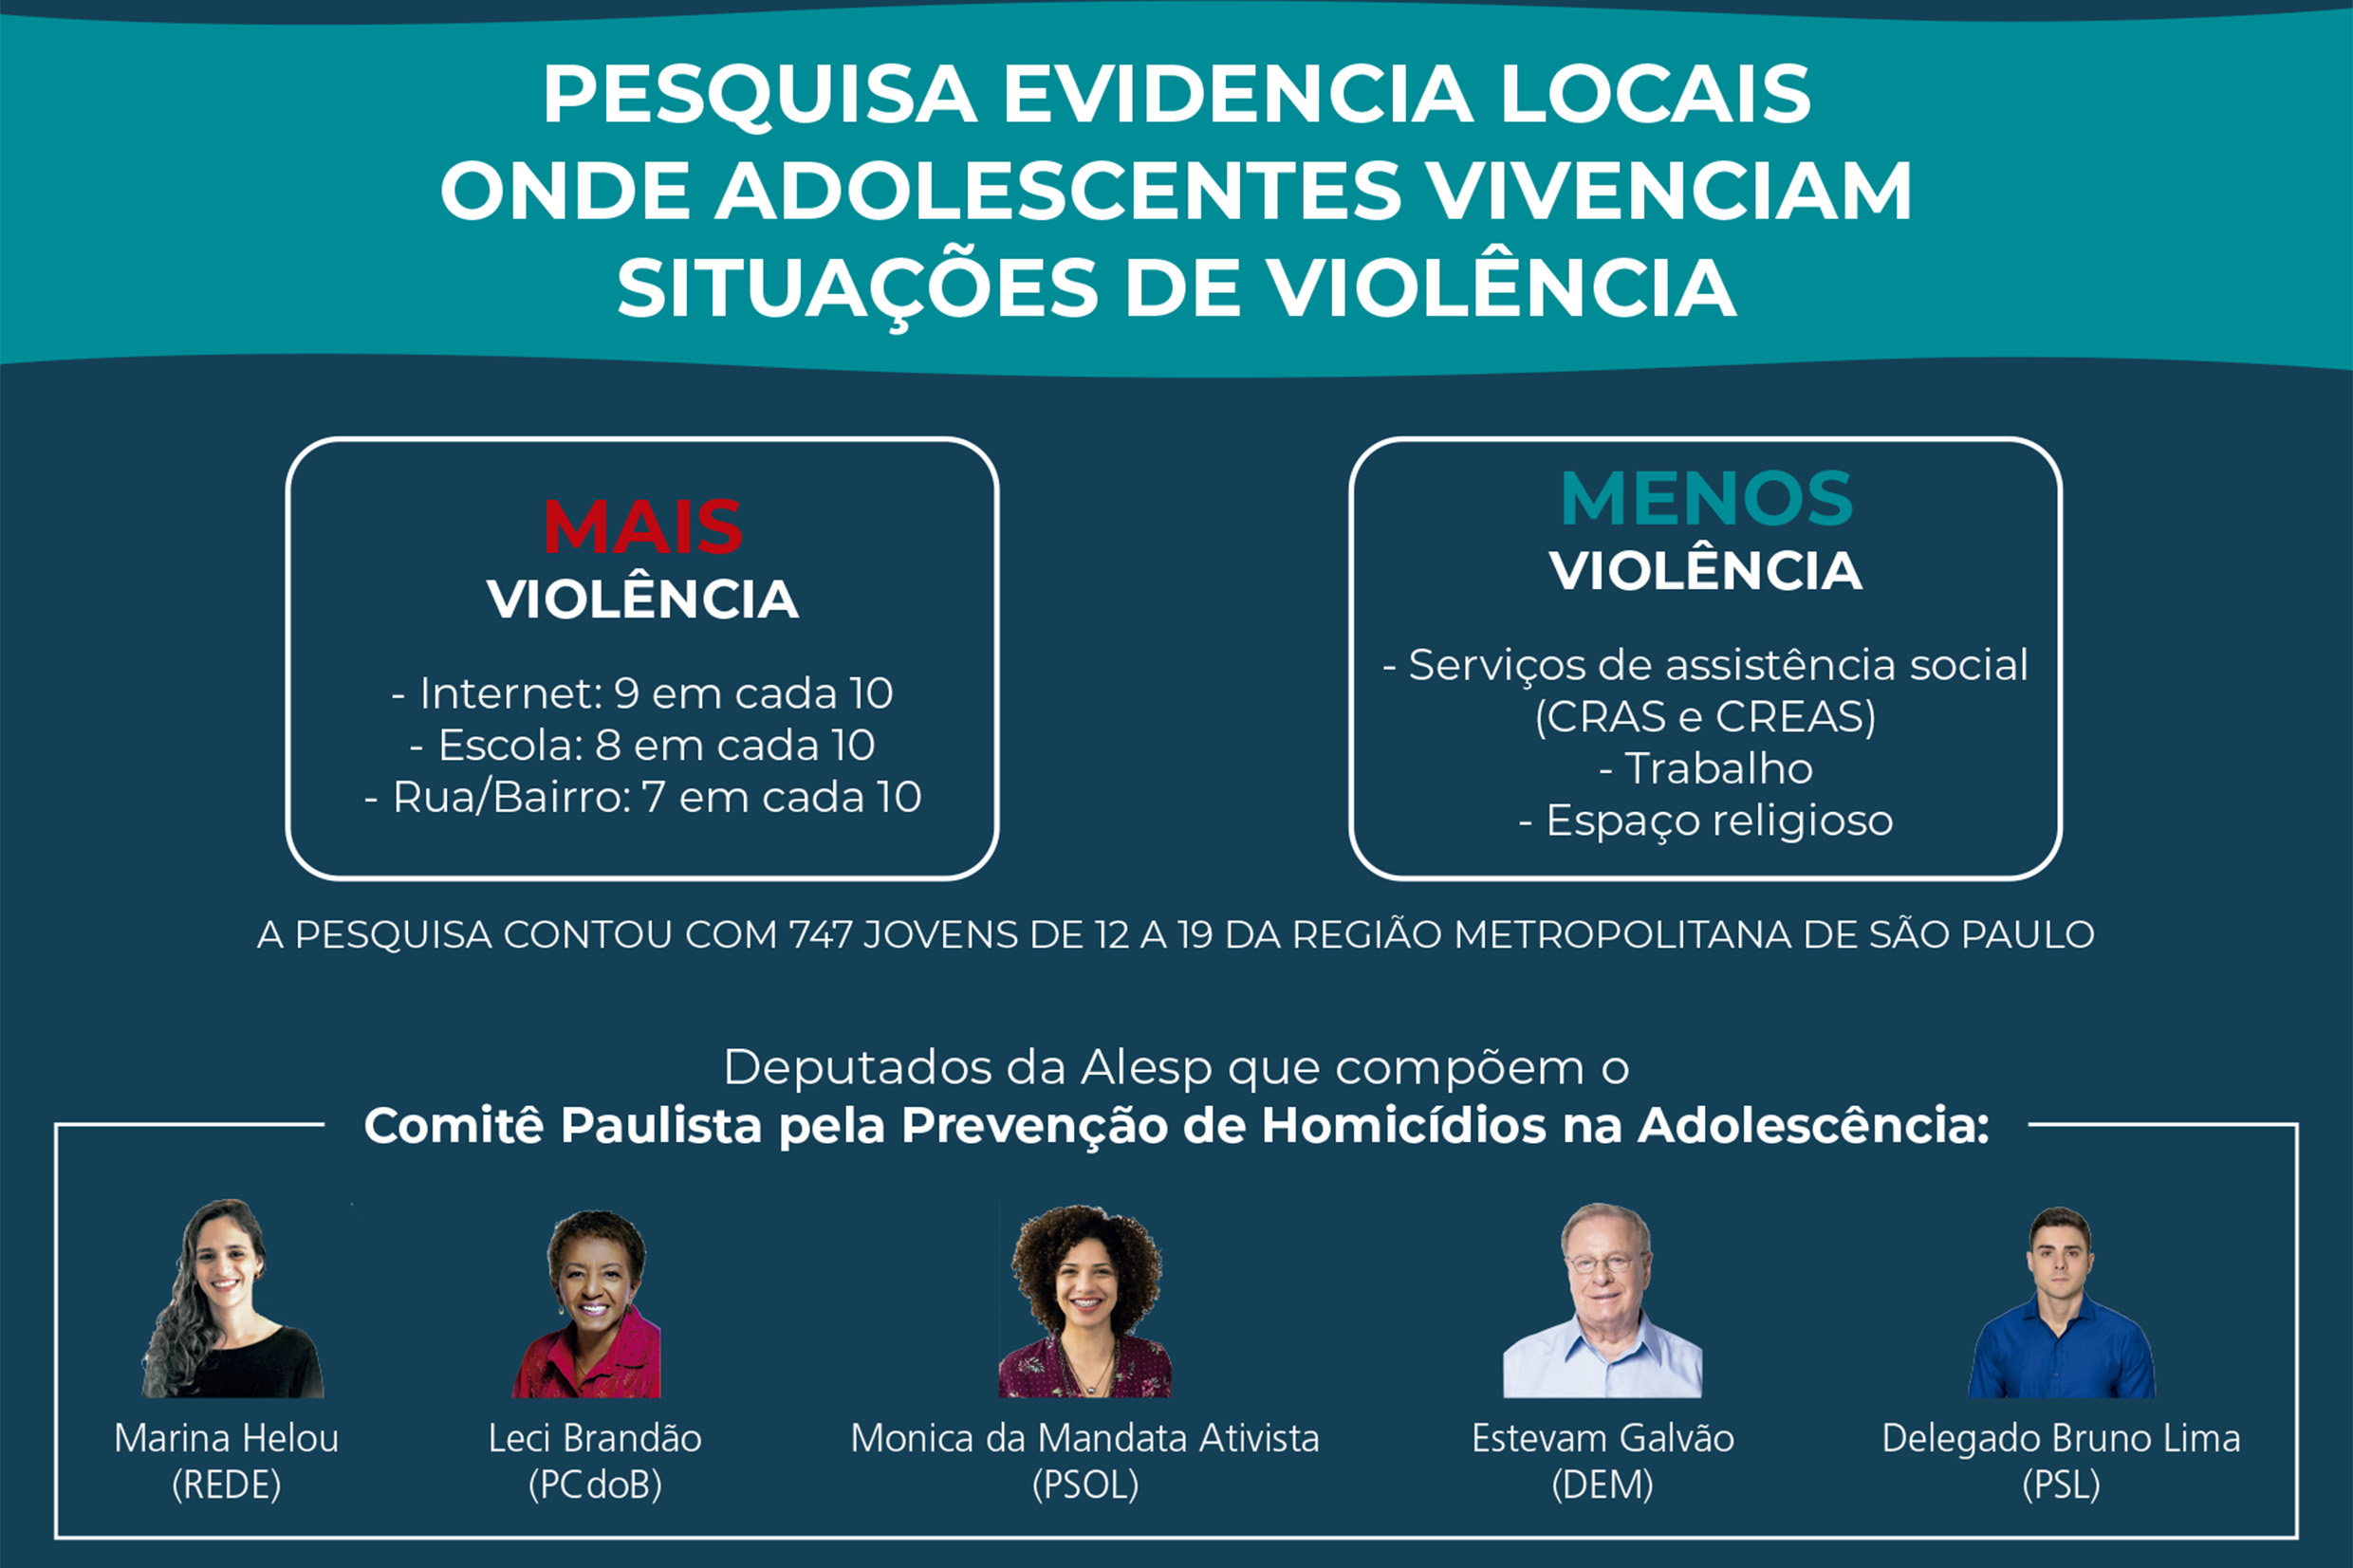 Infográfico<a style='float:right' href='https://www3.al.sp.gov.br/repositorio/noticia/N-07-2021/fg270368.jpg' target=_blank><img src='/_img/material-file-download-white.png' width='14px' alt='Clique para baixar a imagem'></a>